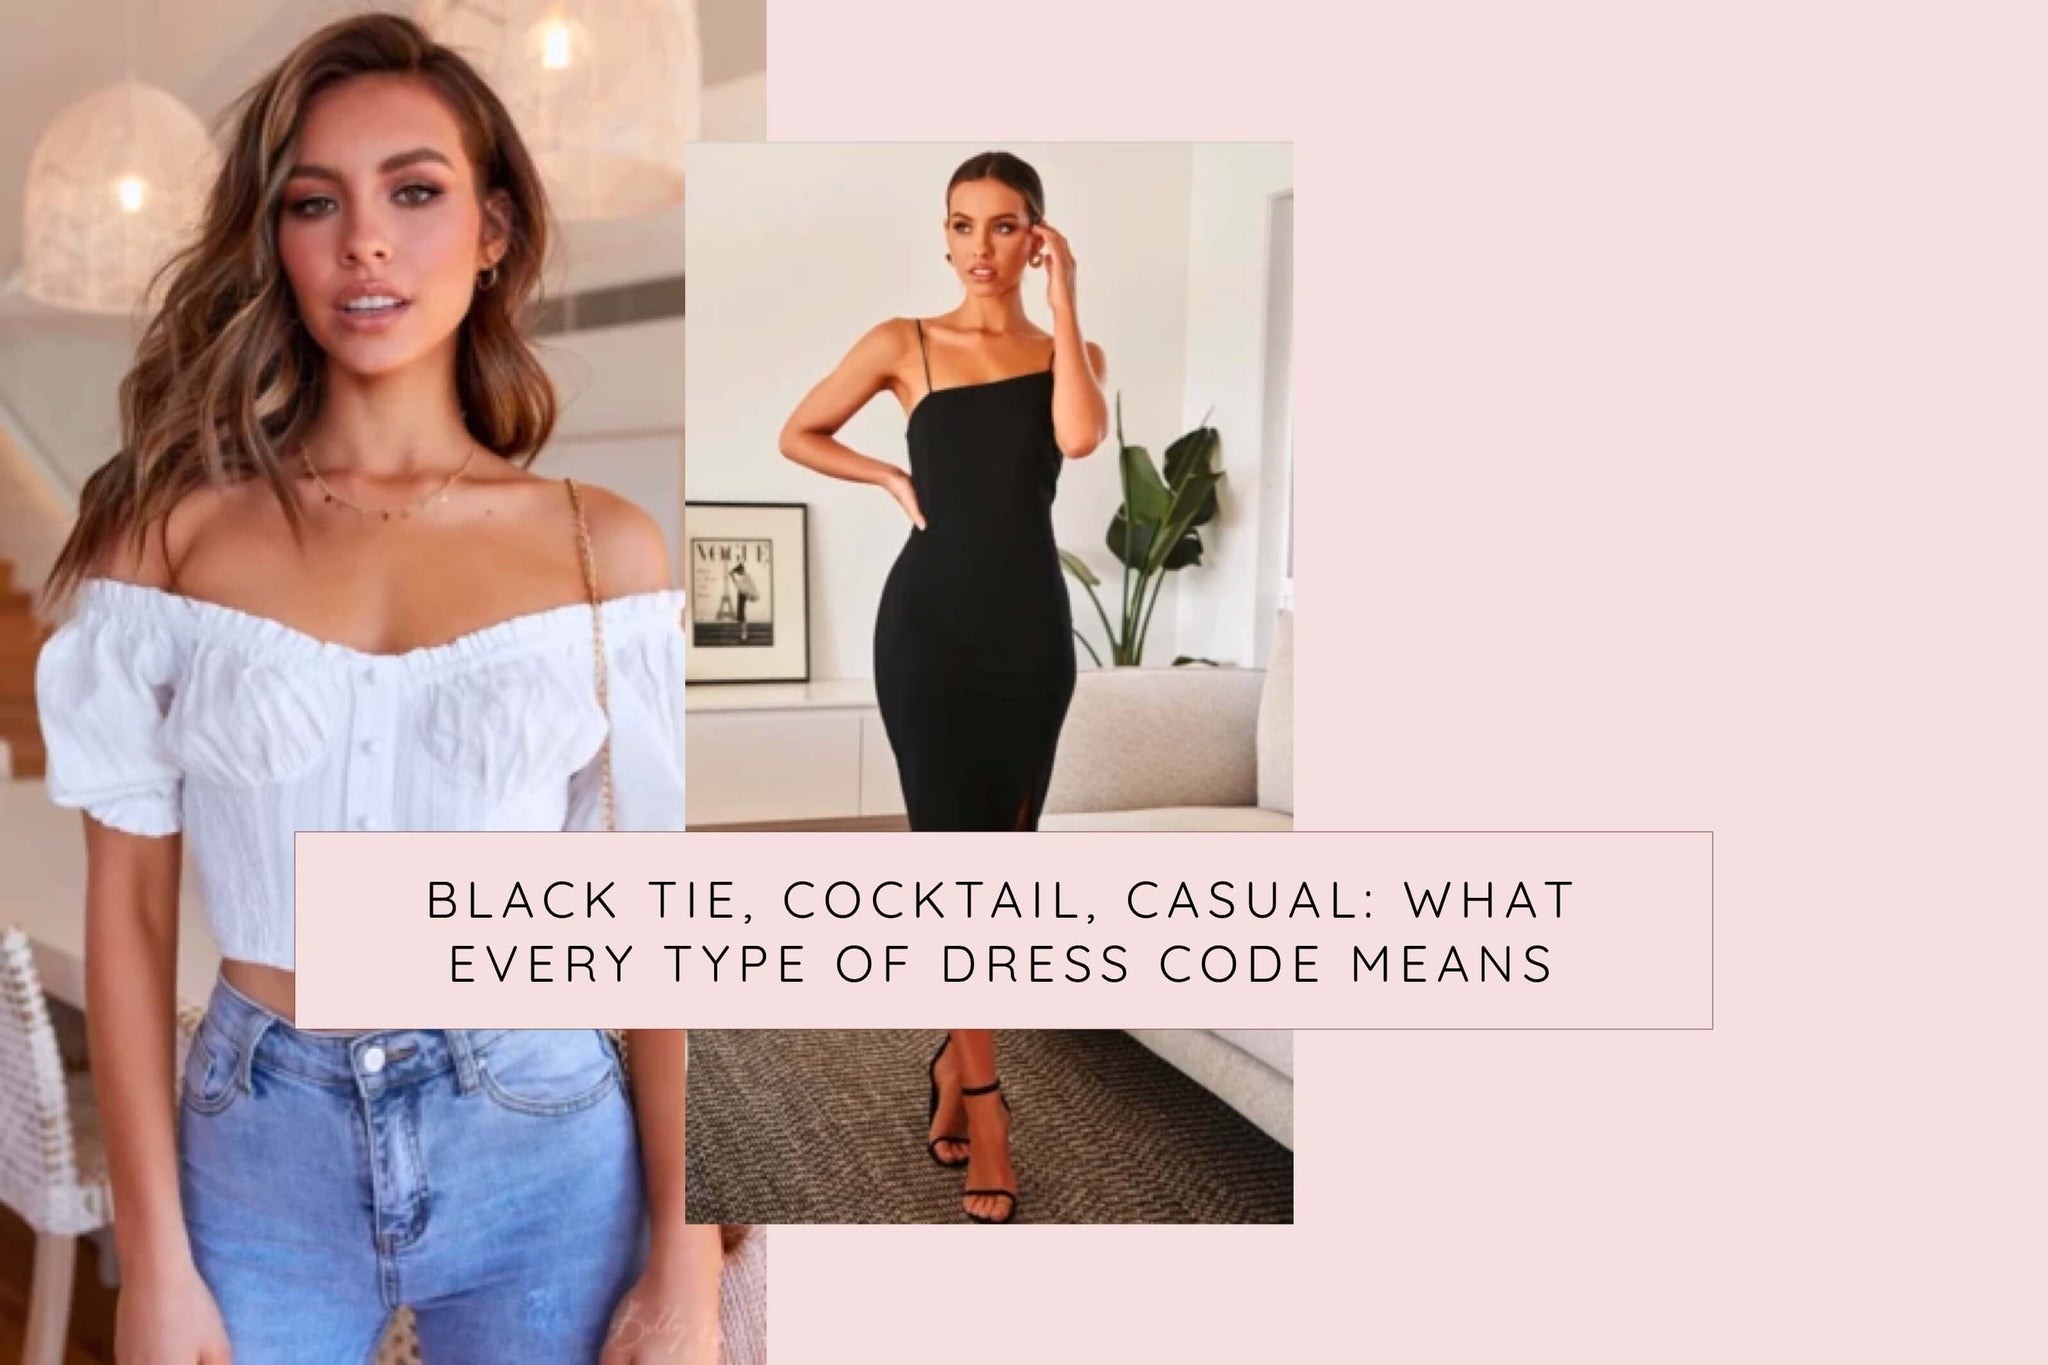 Black tie, Cocktail, Casual: What every type of dress code means